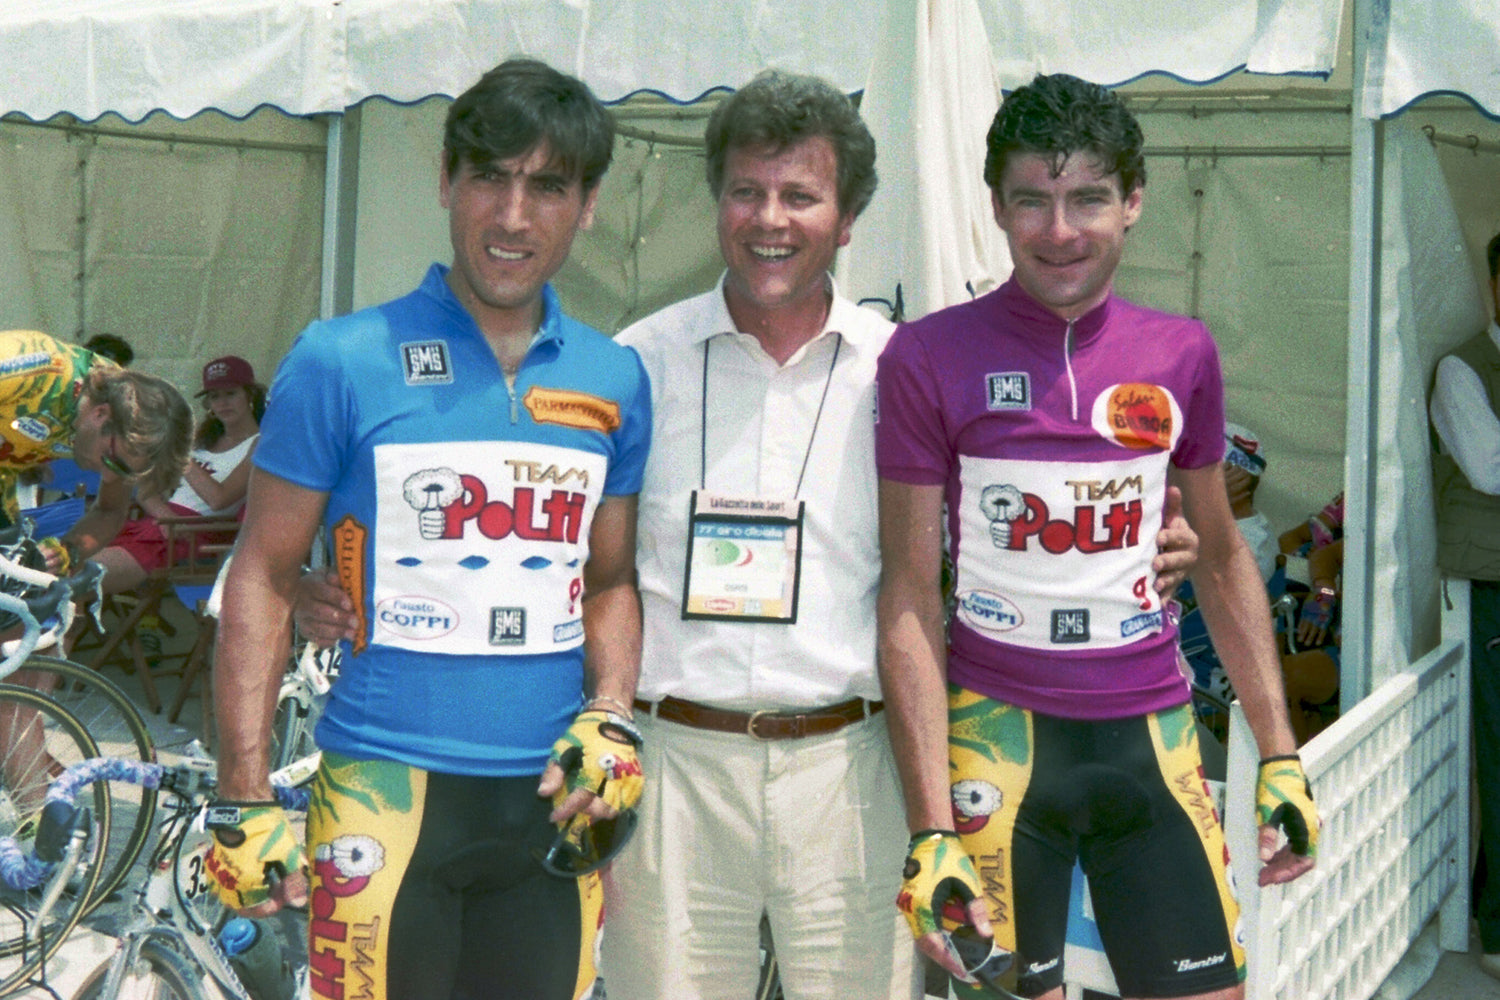 It was all smiles before stage 11 (Marostica - Bibione) of the 1994 Giro D'Italia.  If you have to ride all day, every day in the Polti jersey, it's little wonder why Gianni Bugno and Djamolidine Abduzhaparov look so happy to swap their standard team jersey for the maglia azzurro e maglia ciclamino!  Photo: Fotoreporter Sirotti.